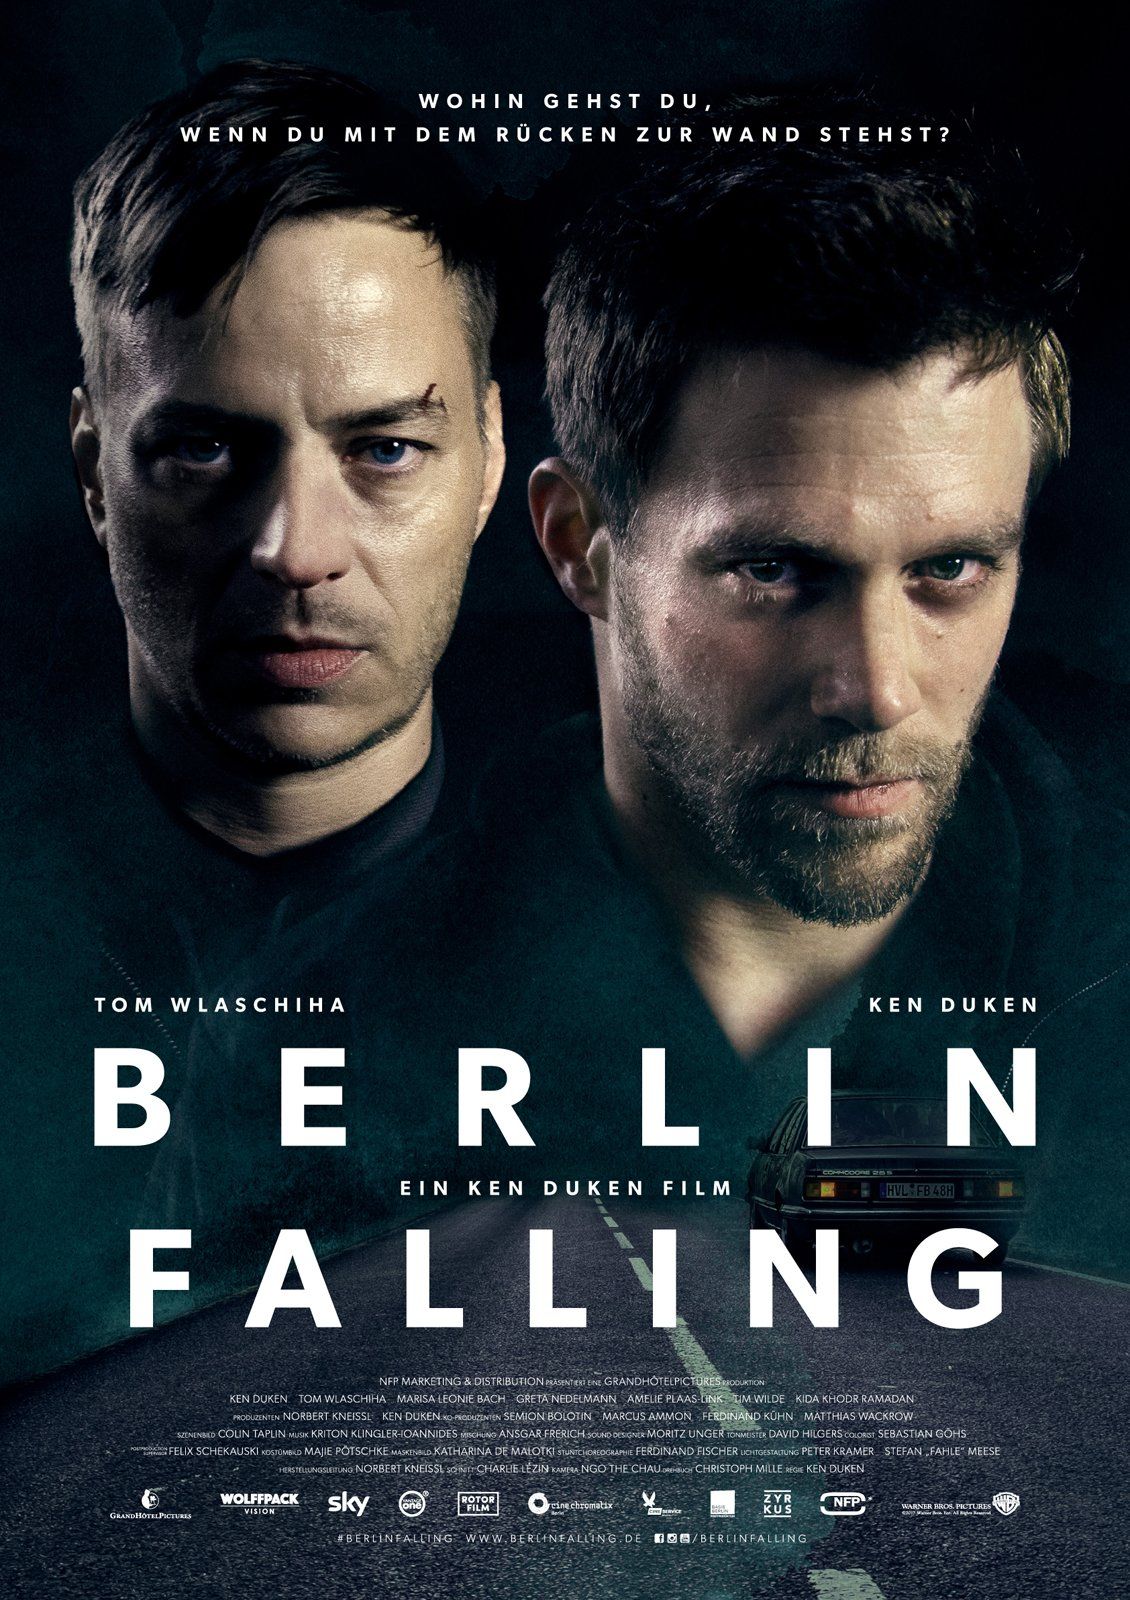 Promotional poster for 'Berlin Falling' featuring the intense action directed by Ferdi Fischer, who also coordinated the stunts, showcasing his dual expertise as an action director and stunt coordinator